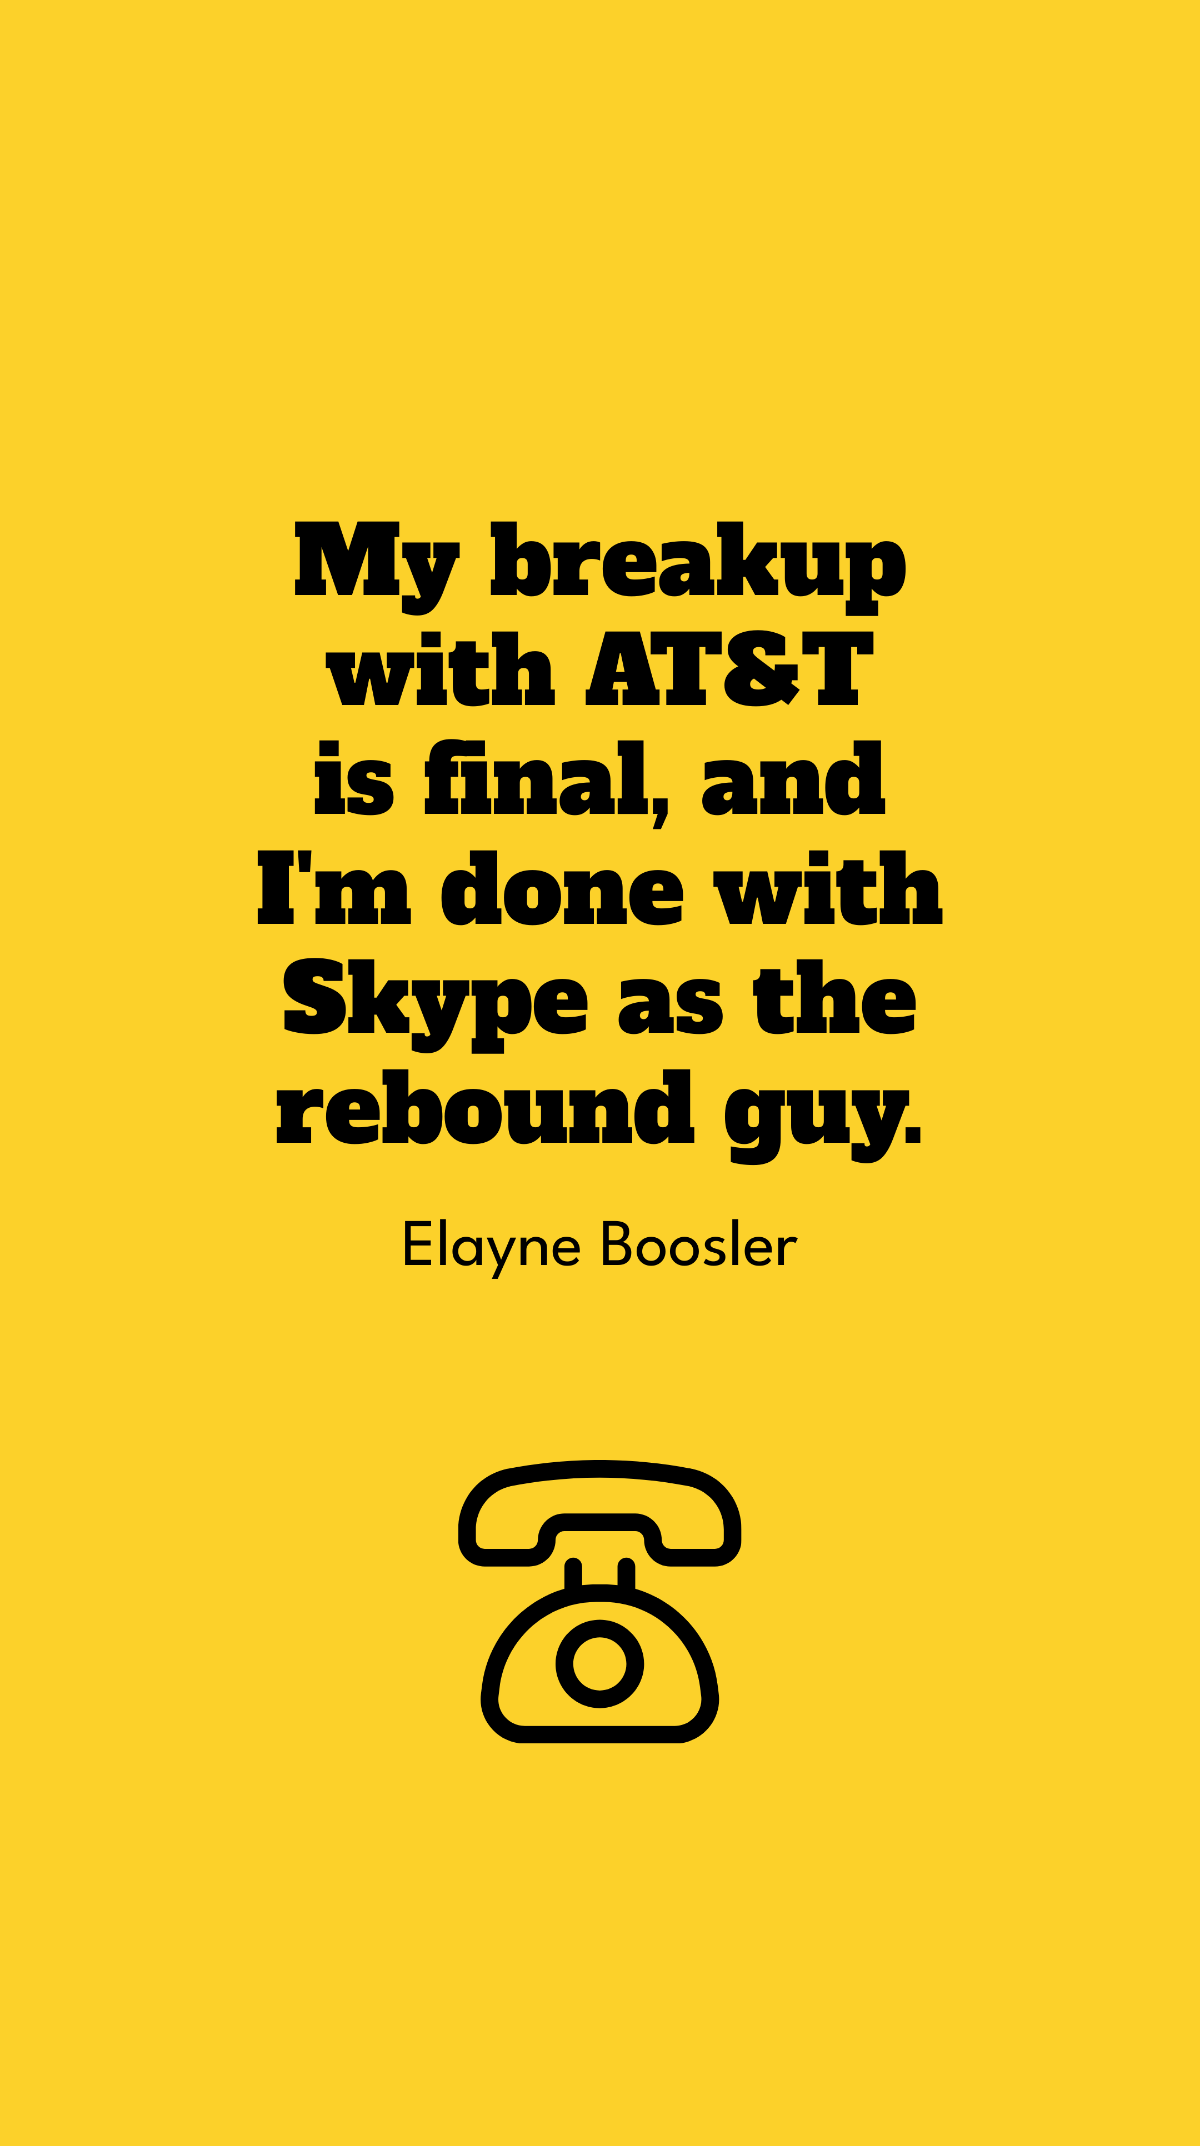 Elayne Boosler - My breakup with AT&T is final, and I'm done with Skype as the rebound guy. Template